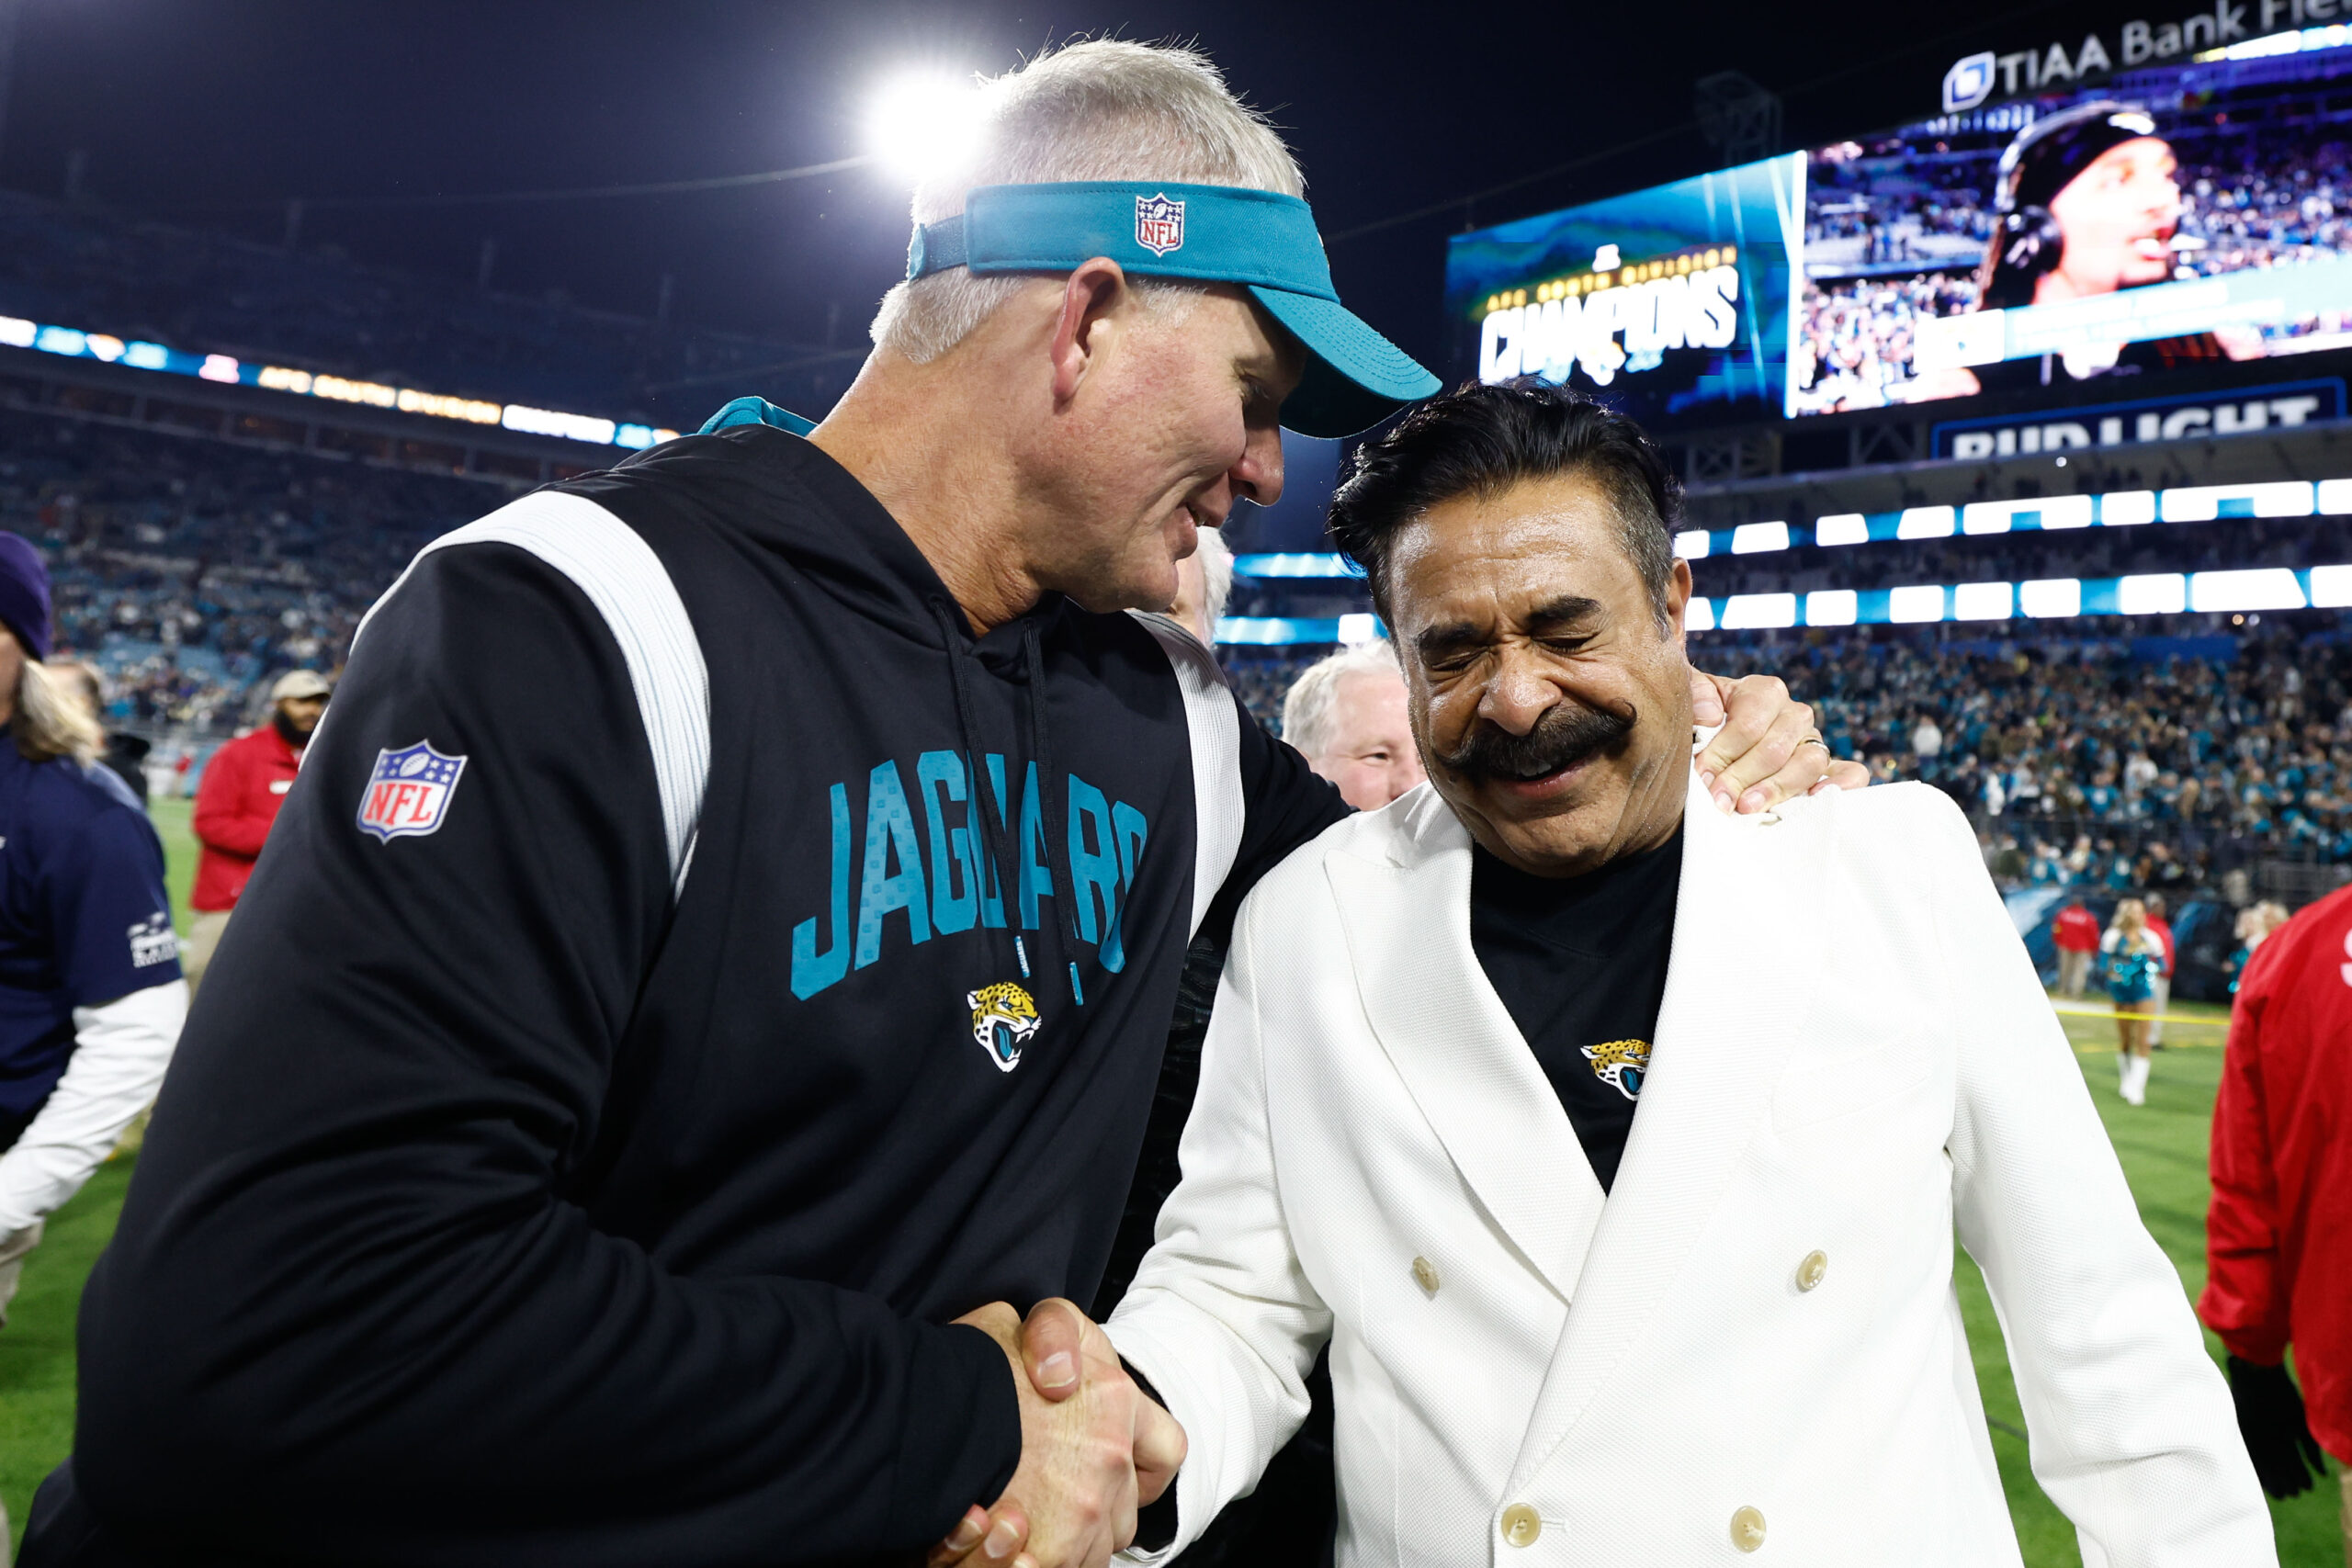 Forbes: Jaguars owner Shad Khan got 60 percent richer in last year